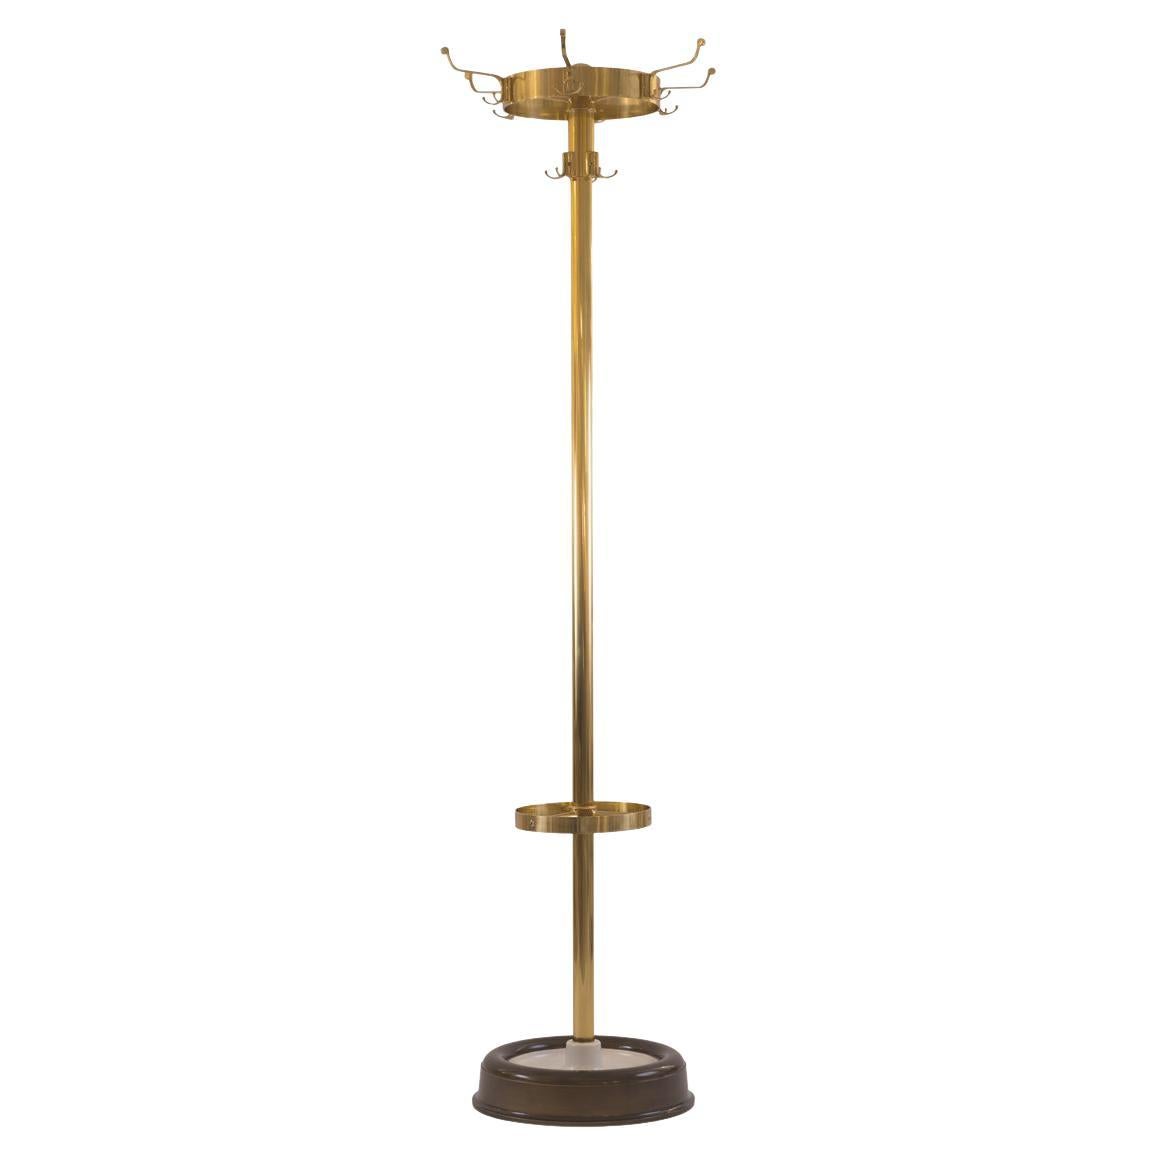 Very Elegant Viennese 50ies Coatstand Pictured in a Semigloss Finish, Re Edit